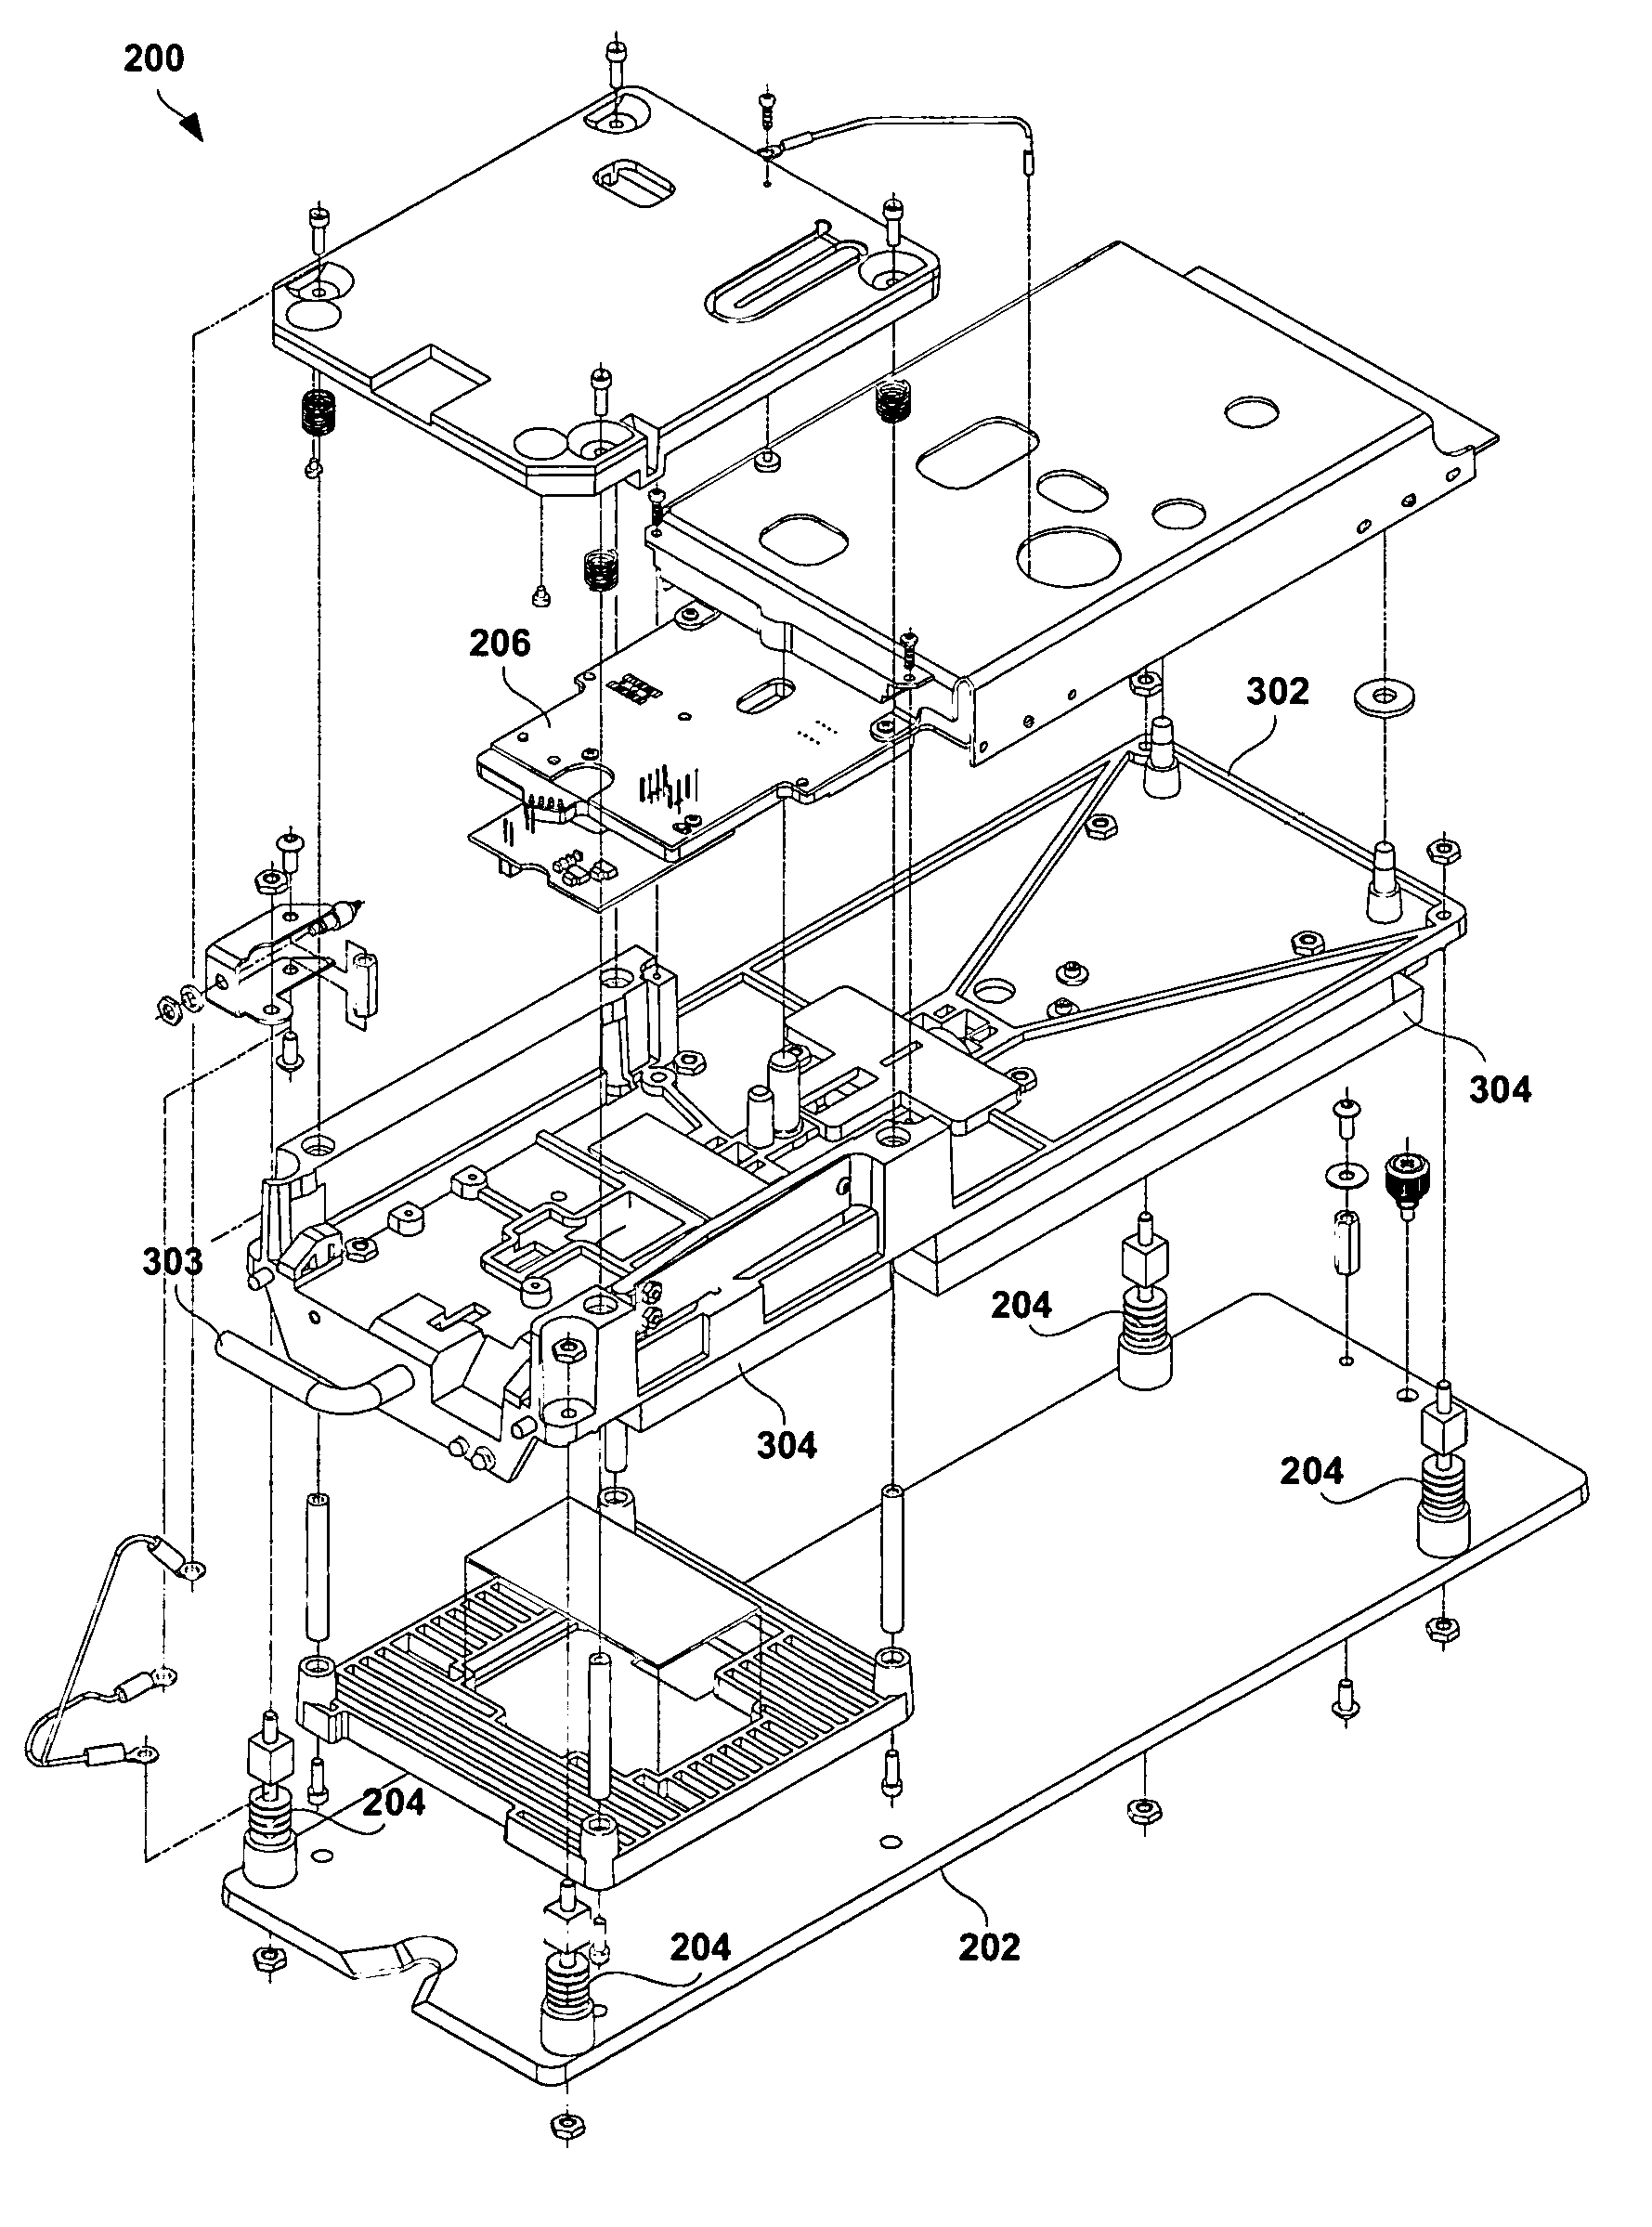 Vibration isolating disk drive receiving stations and chassis used in the manufacture and/or testing of hard disk drives